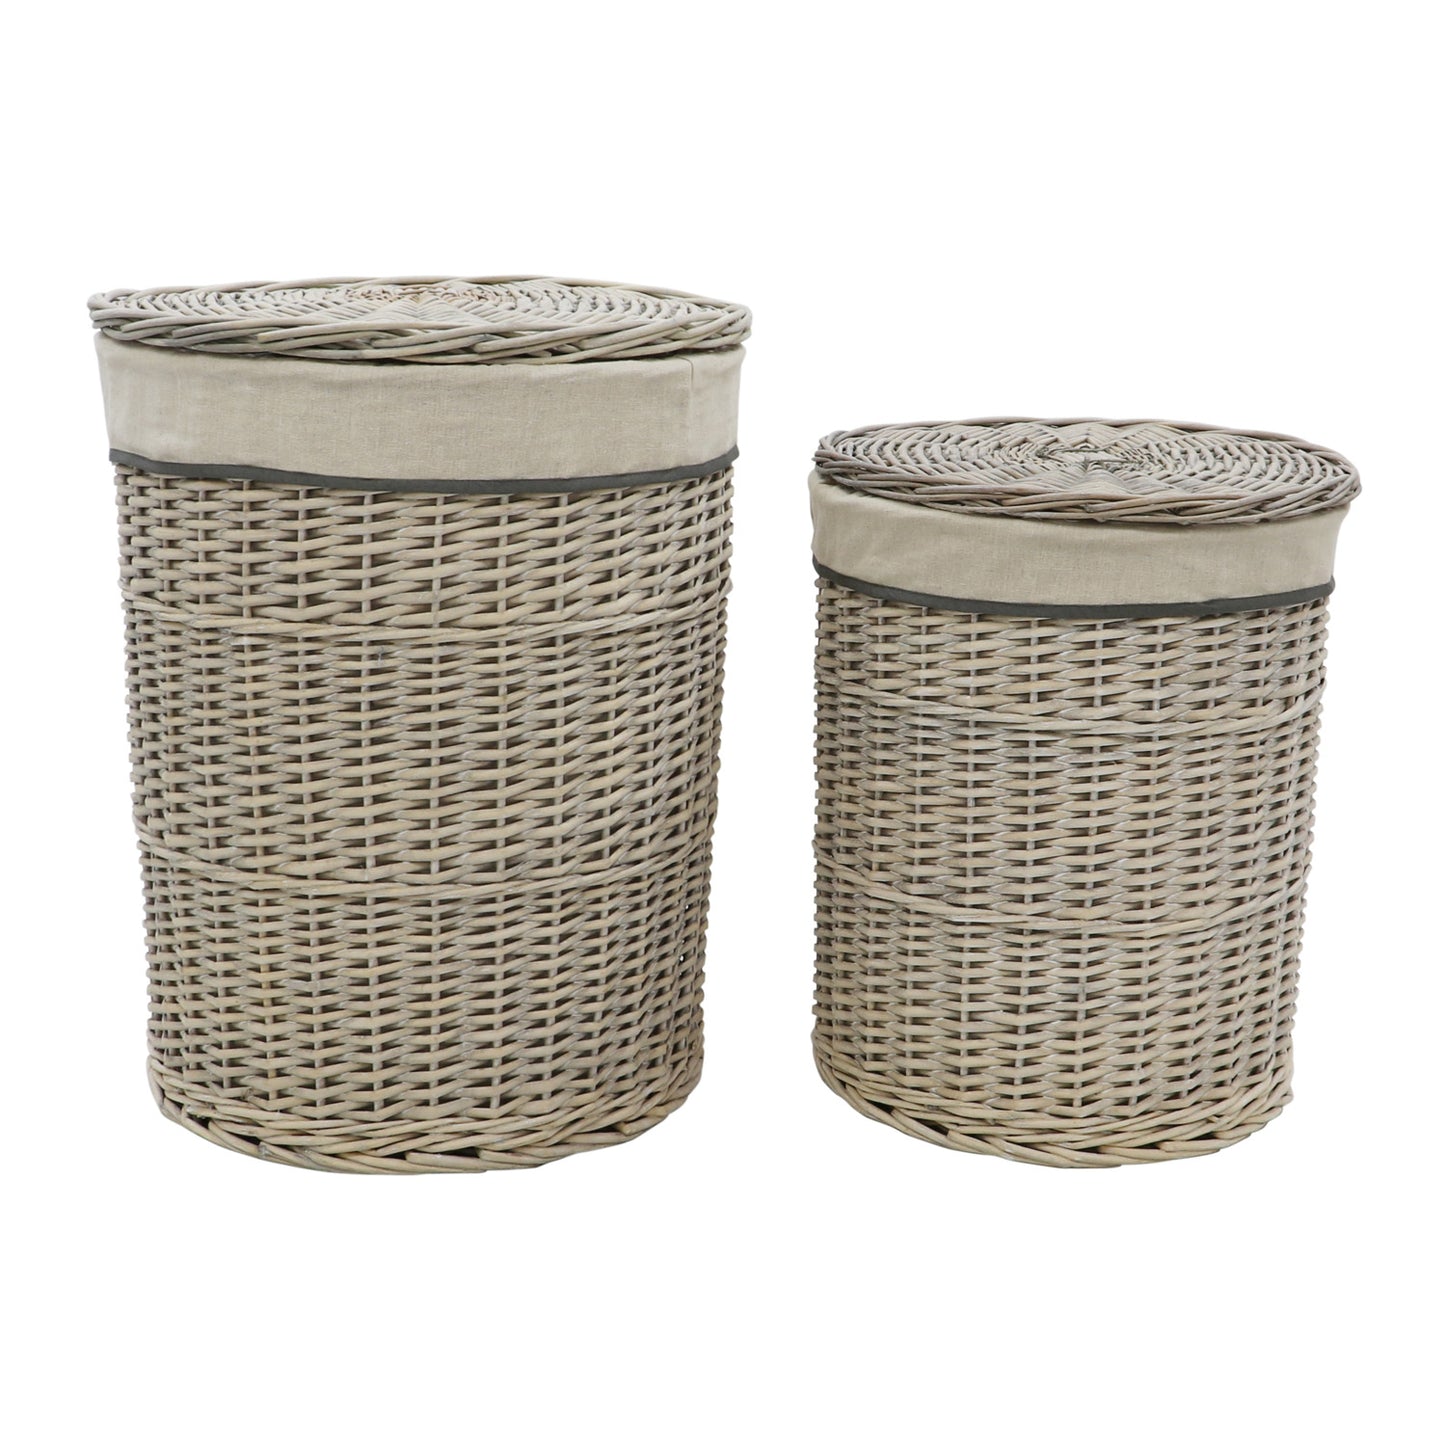 Arianna Antique Wash Round Willow Laundry Baskets and Bins Set